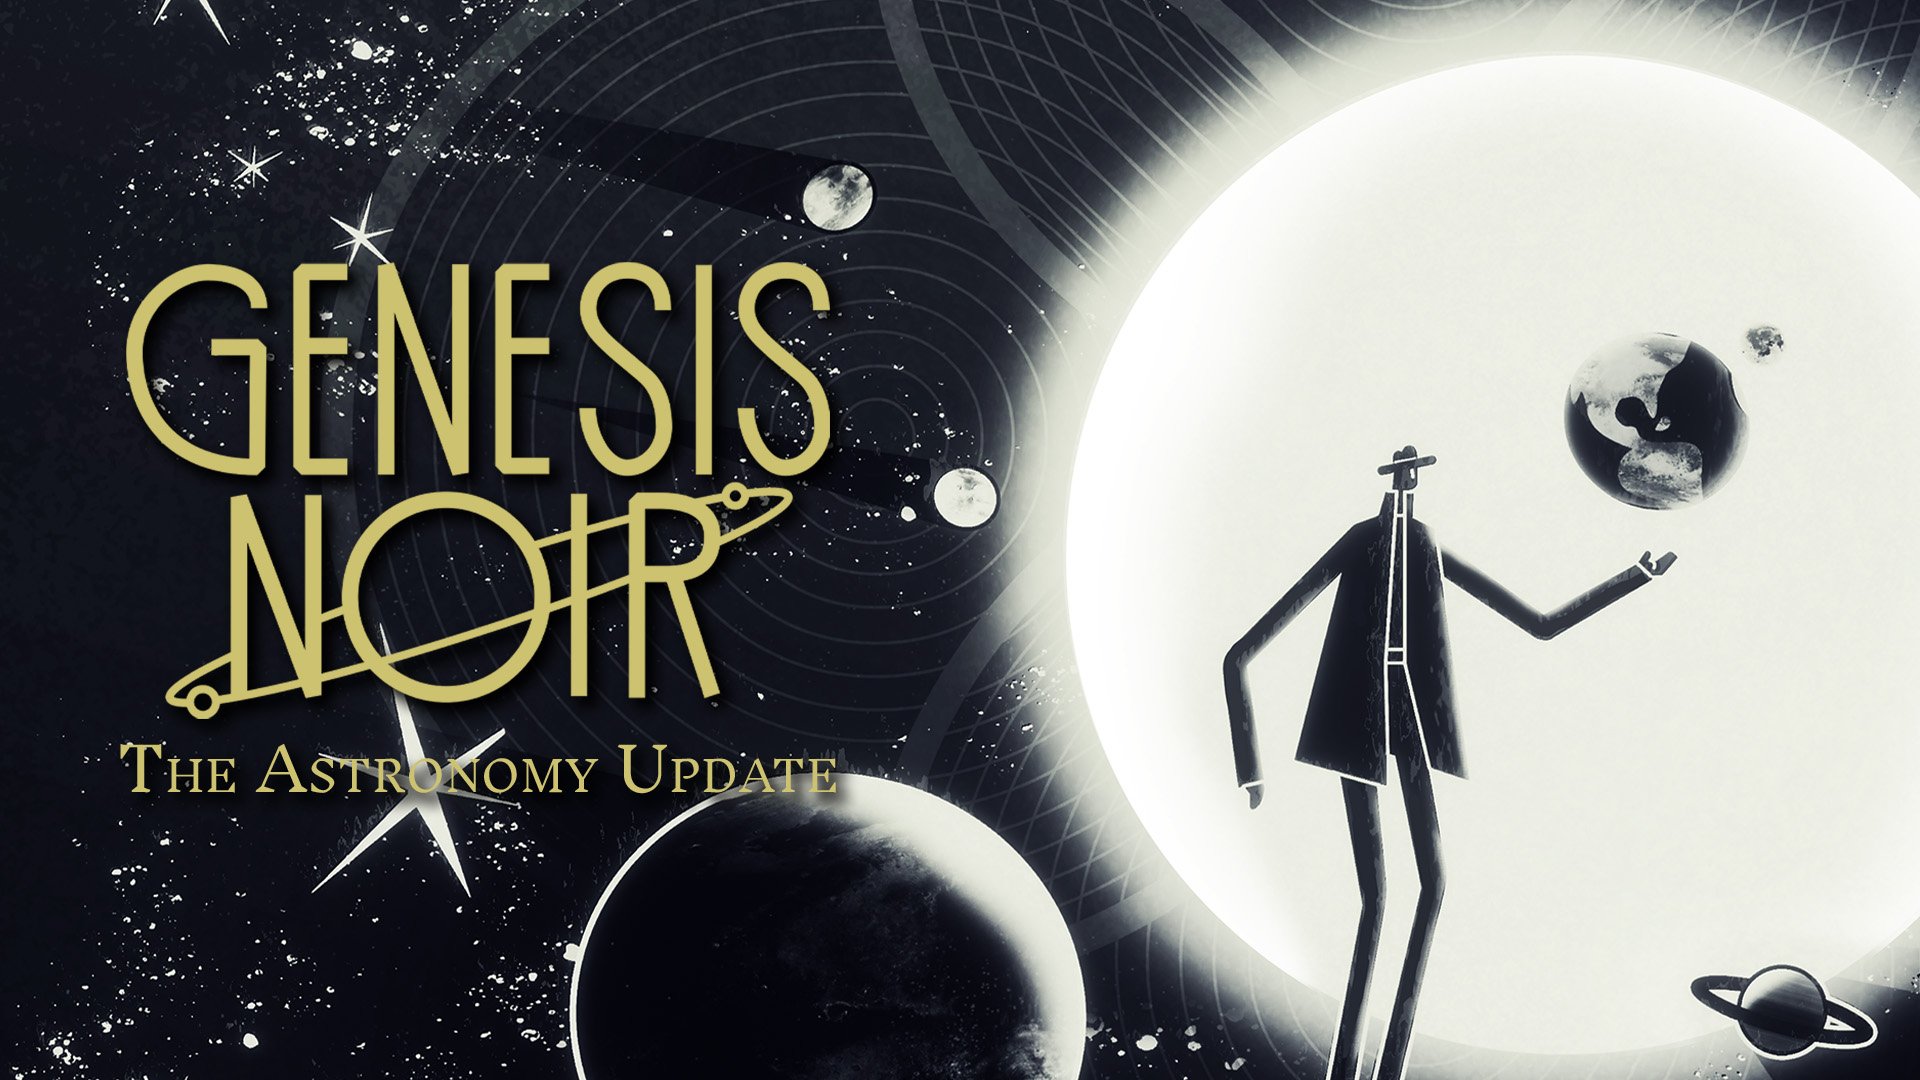 Video For Let the Jazz Flow with the Astronomy Update for Genesis Noir